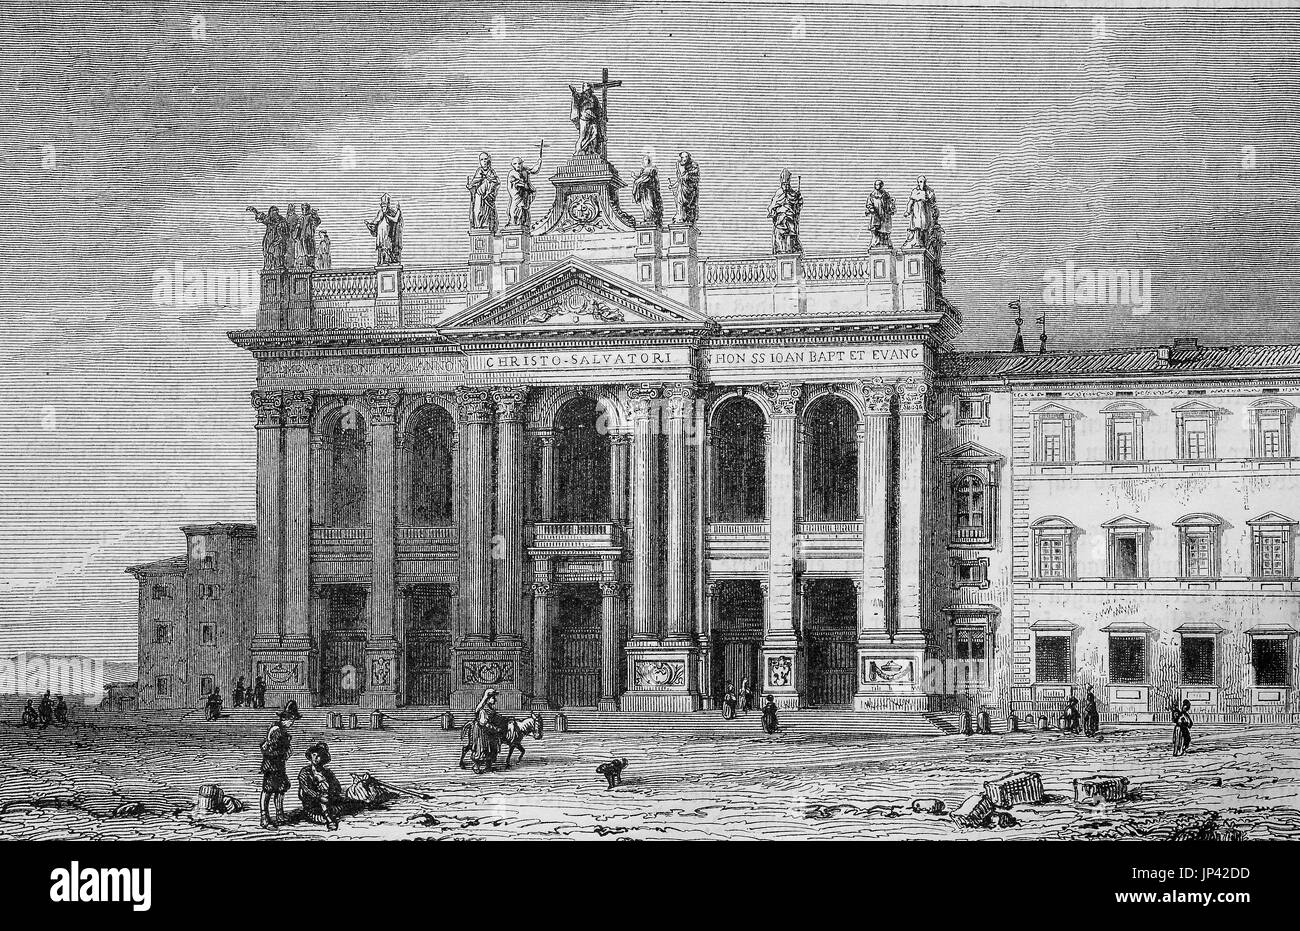 The Papal Archbasilica of St. John in Lateran or Arcibasilica Papale di San Giovanni in Laterano, commonly known as St. John Lateran Archbasilica, St. John Lateran Basilica, St. John Lateran, or simply the Lateran Basilica, is the cathedral church of Rome, Italy , digital improved reproduction of a woodcut publication from the year 1888 Stock Photo